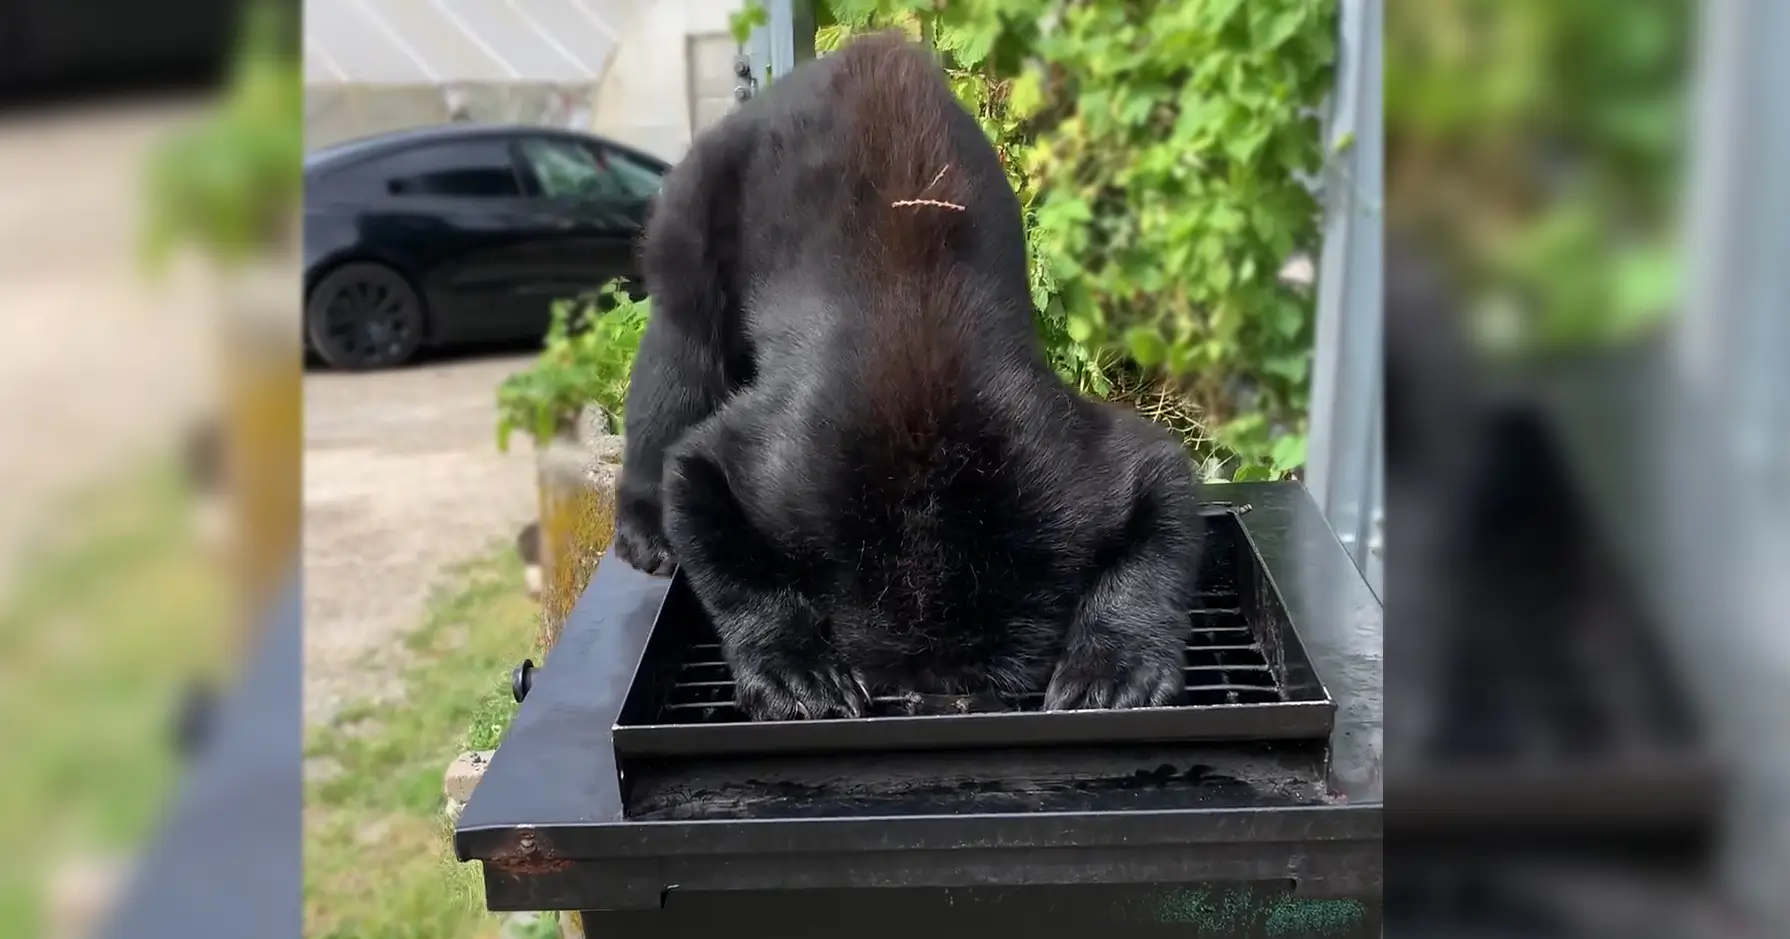 Picture showing a black bear with their head stuck in a grease trap